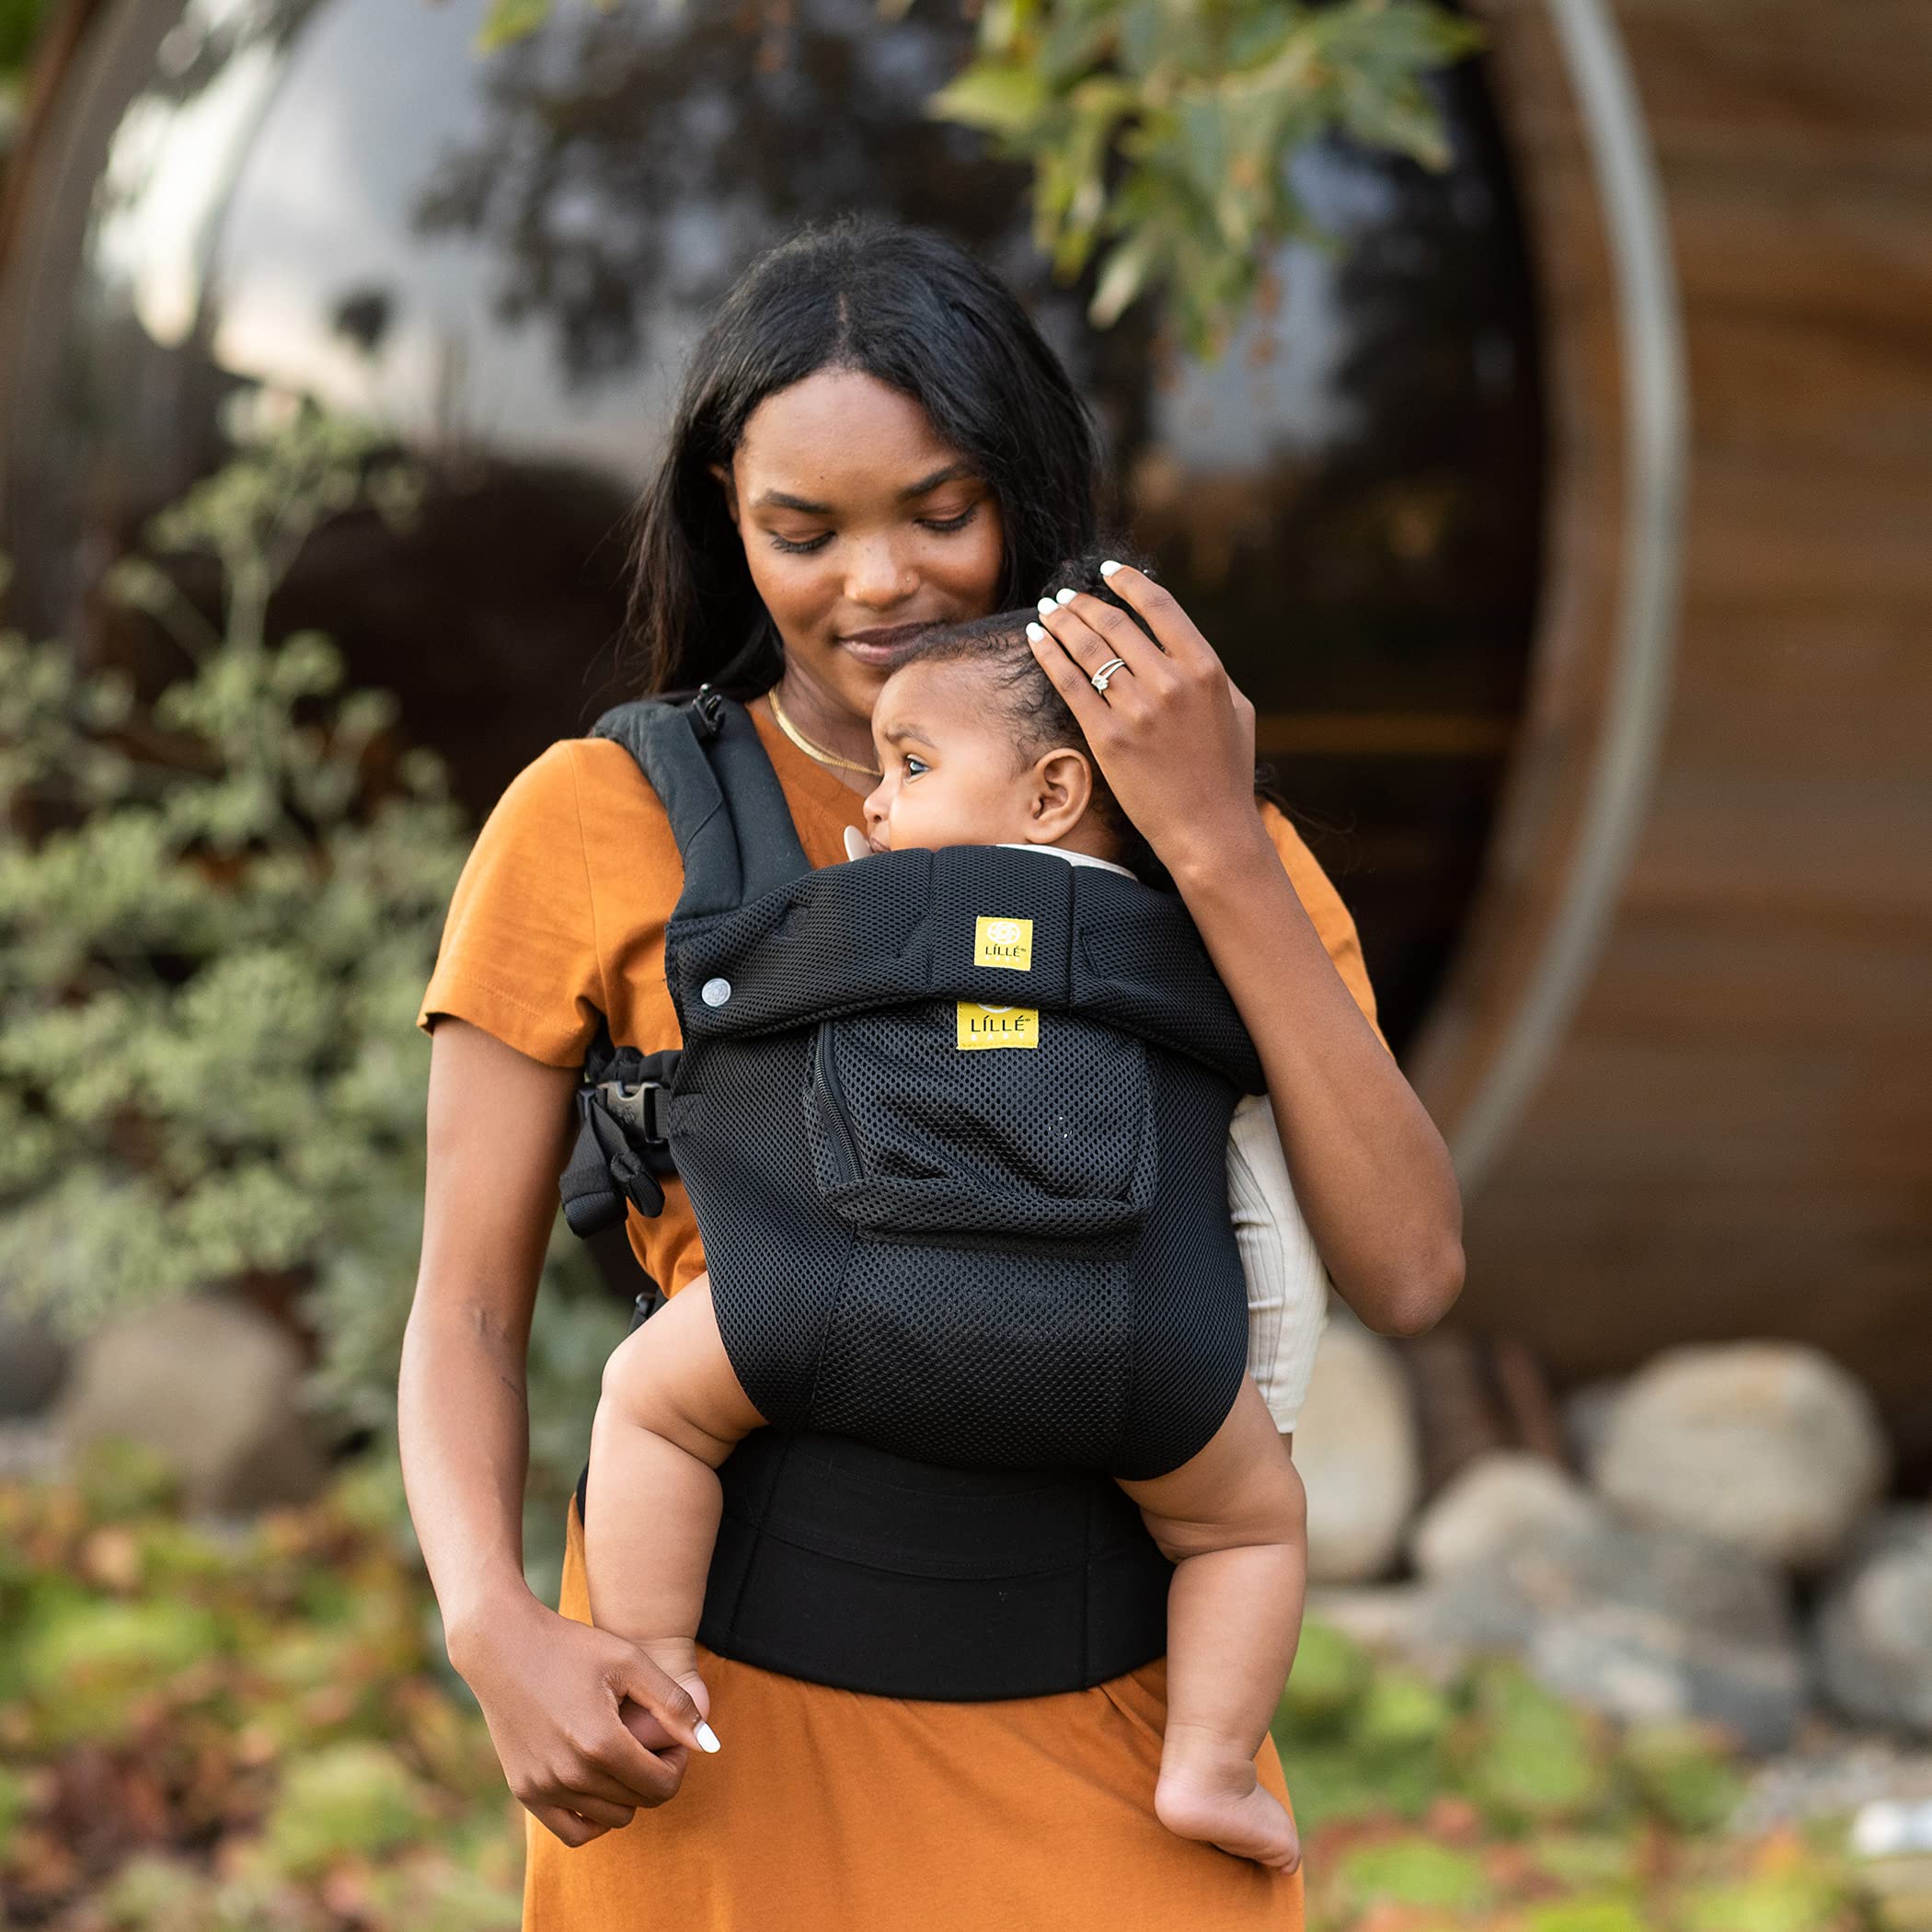 LÍLLÉbaby Complete Airflow Ergonomic 6-in-1 Baby Carrier Newborn to Toddler - with Lumbar Support - for Children 7-45 Pounds - 360 Degree Baby Wearing - Inward and Outward Facing - Black